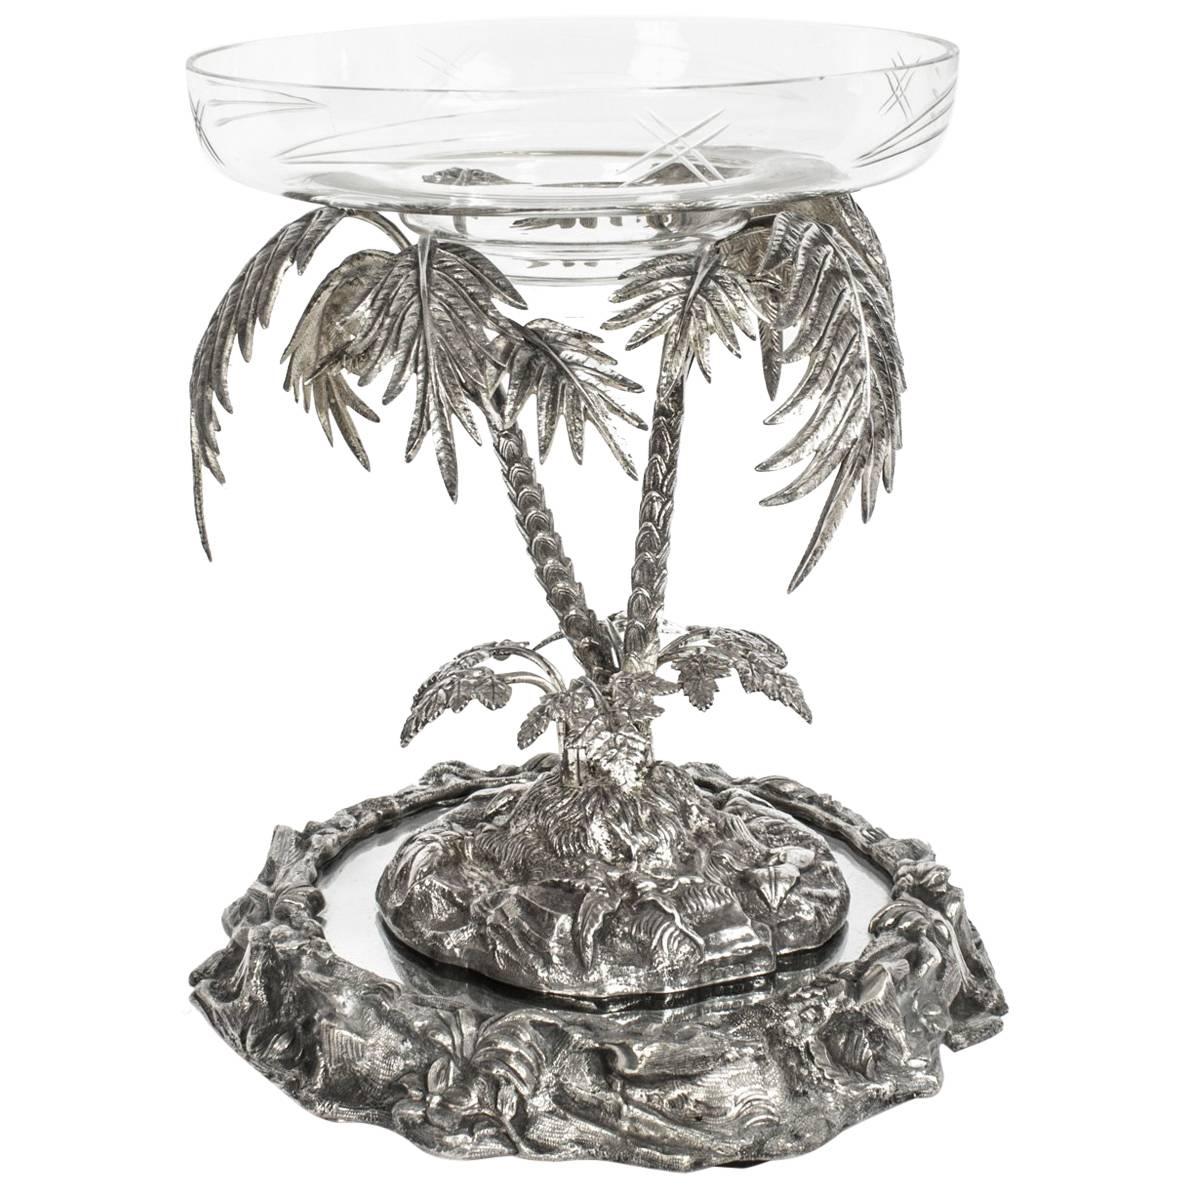 Antique Victorian Silver Plated Palm Tree Centrepiece Mirrored Base, circa 1860